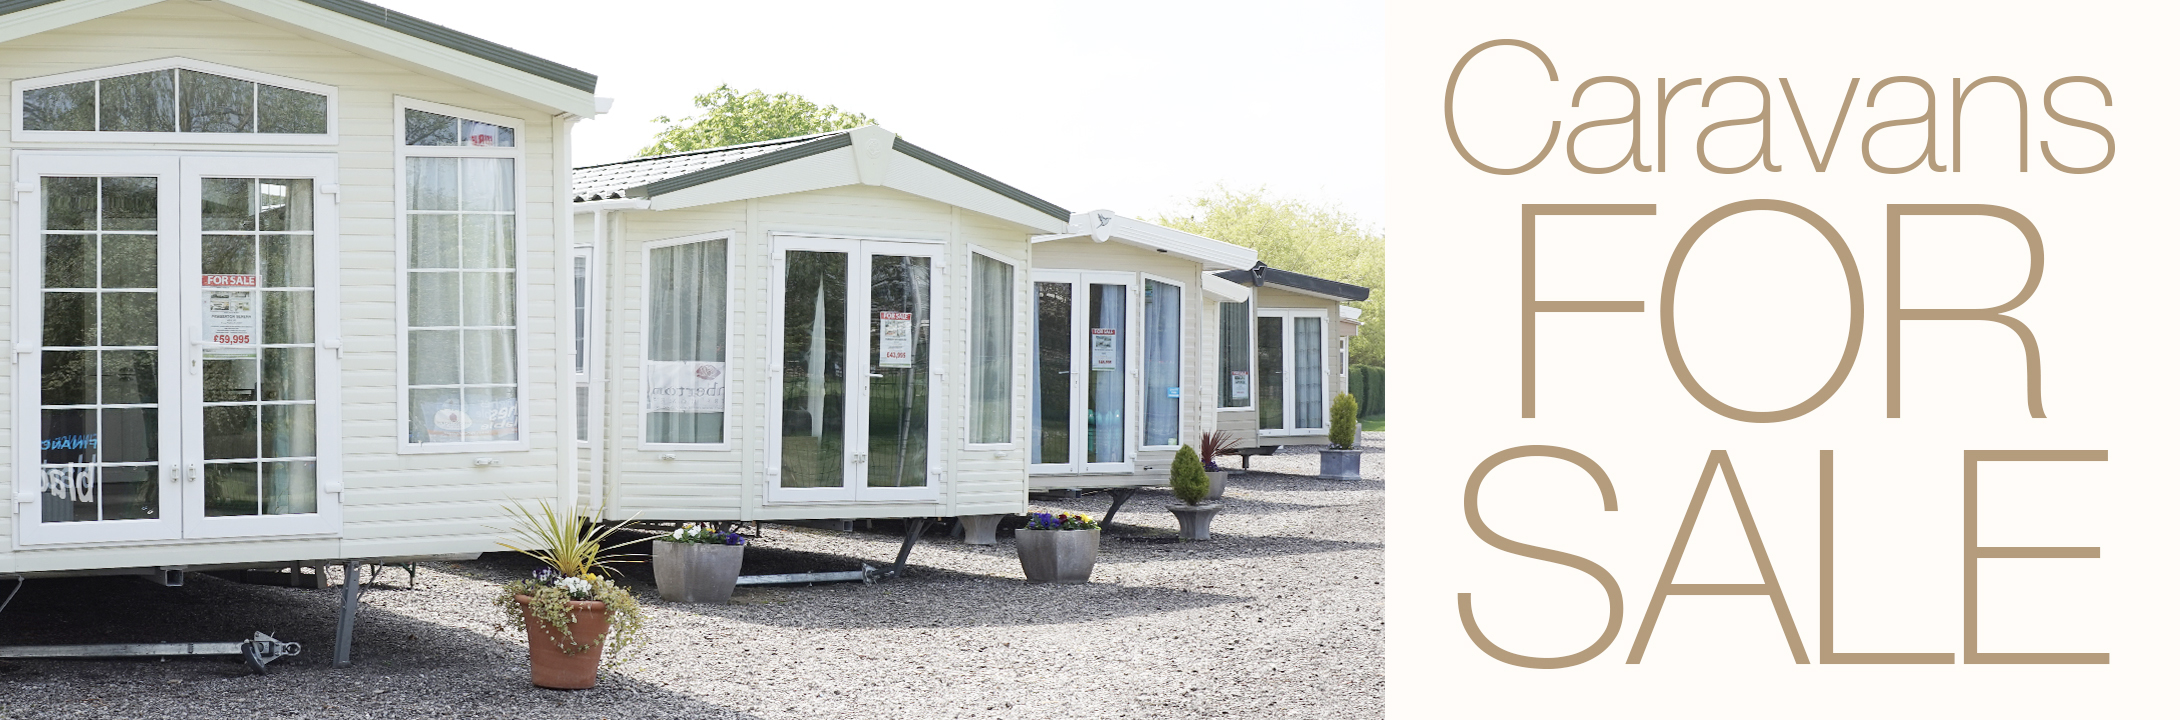 caravan site lincolnshire, touring & camping site lincolnshire, glamping pods with hot tub lincolnshire